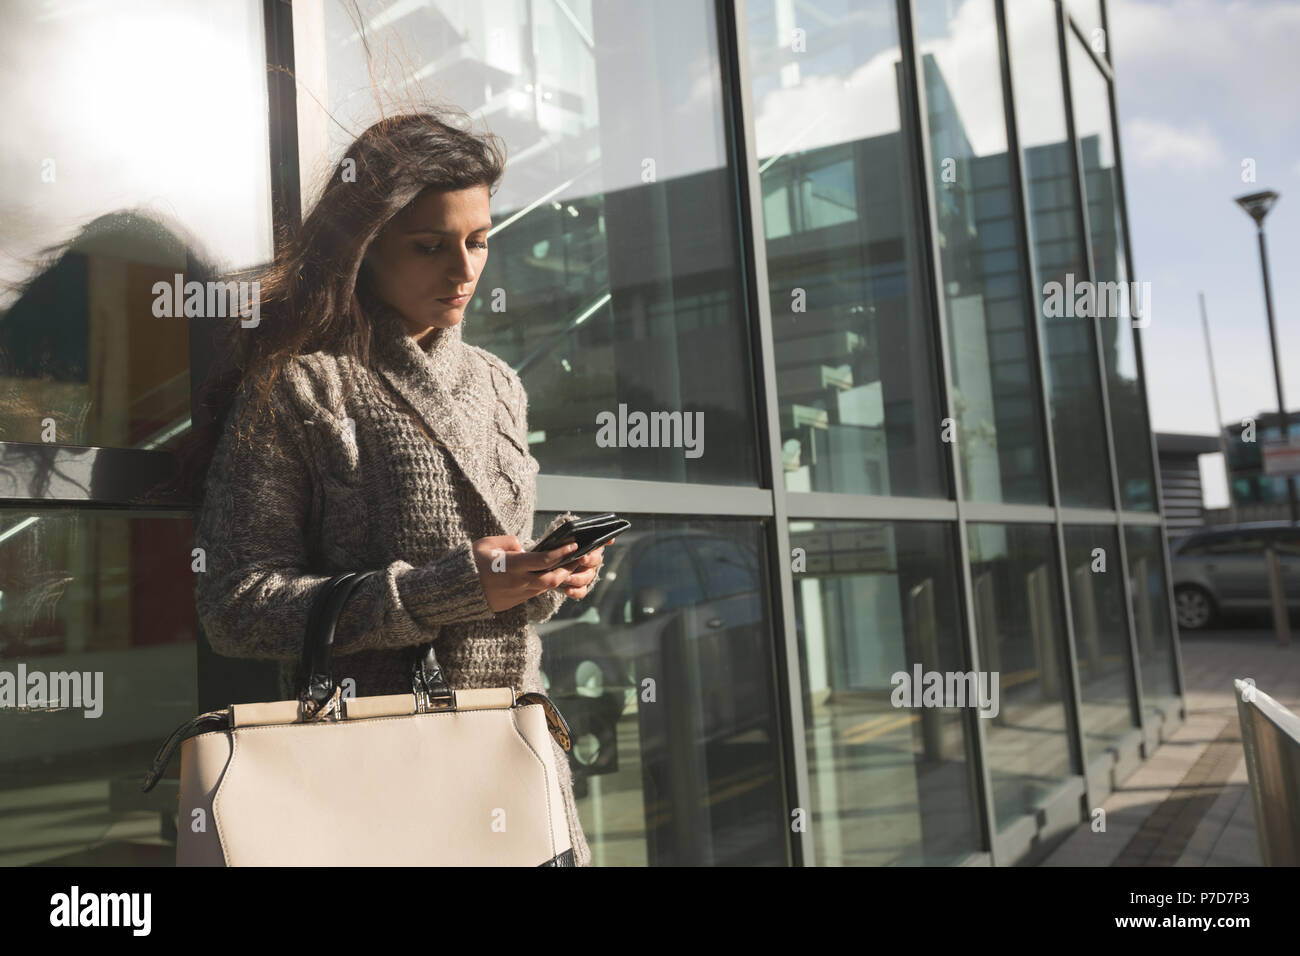 Woman using mobile phone outside a building structure Stock Photo